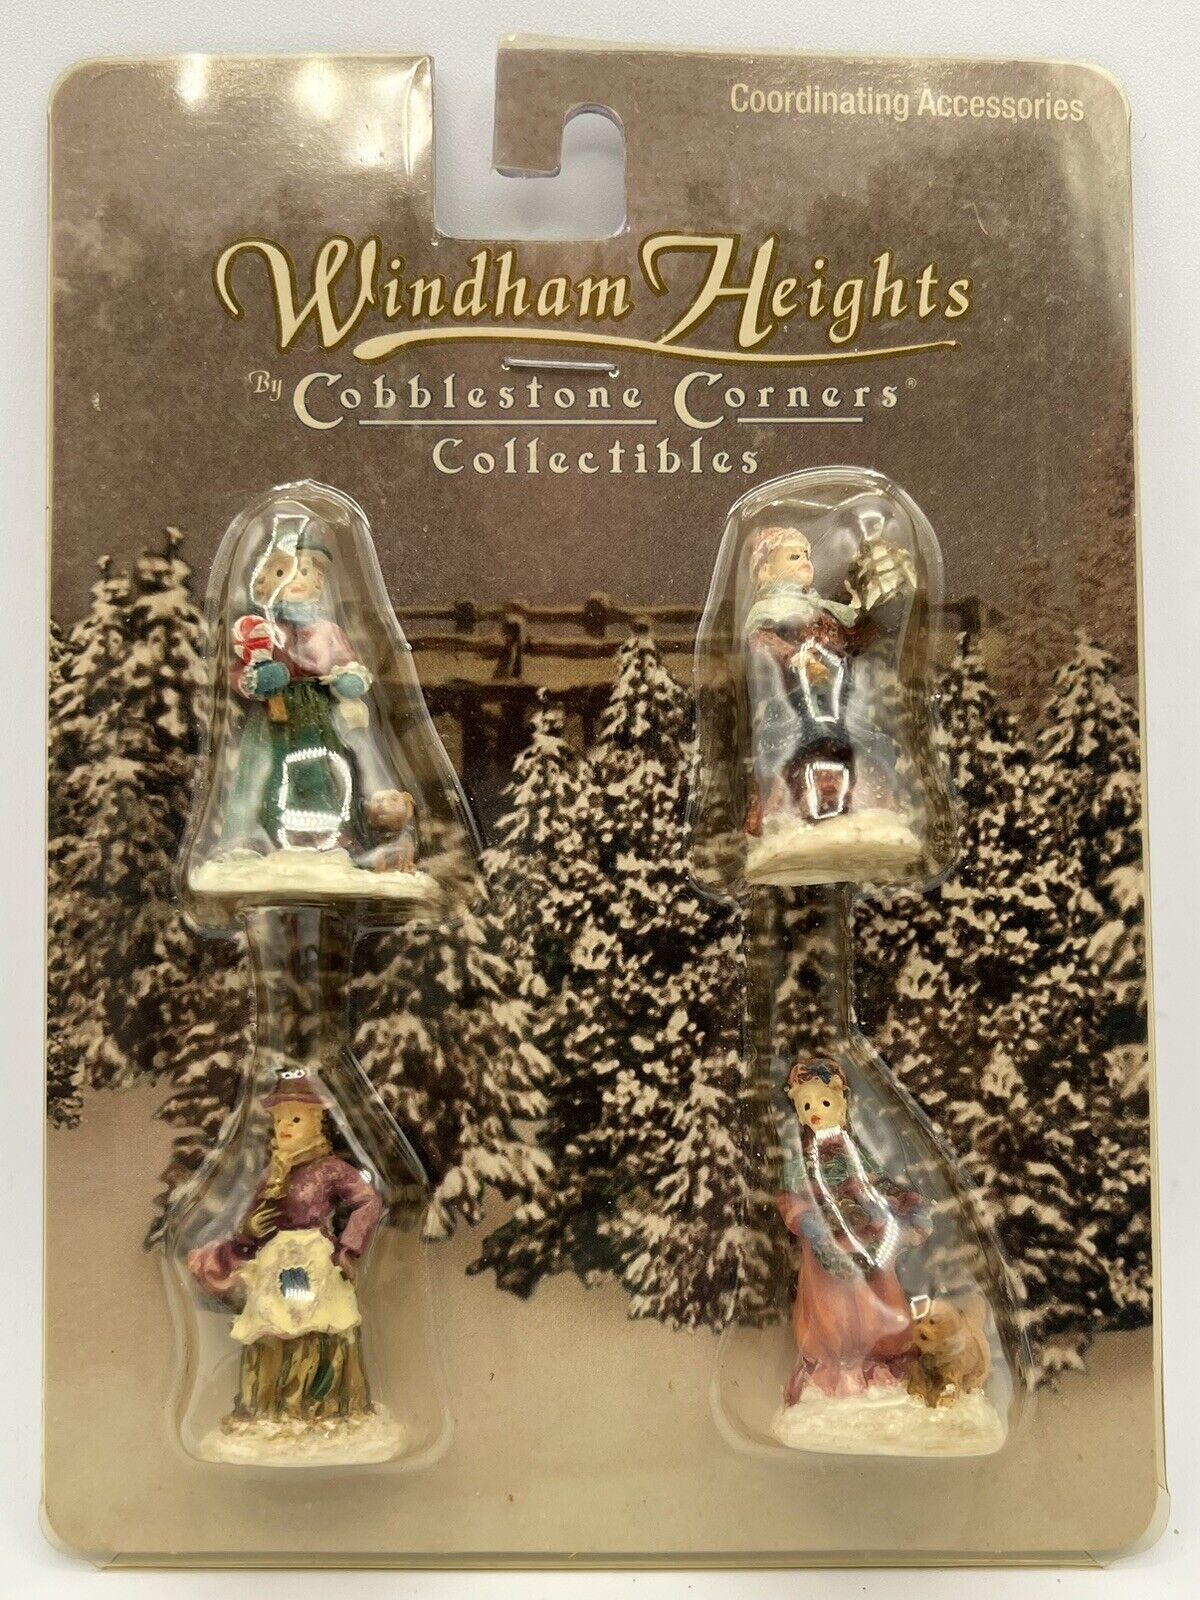 Windham Heights Cobblestone Corners Collectibles Accessories~New